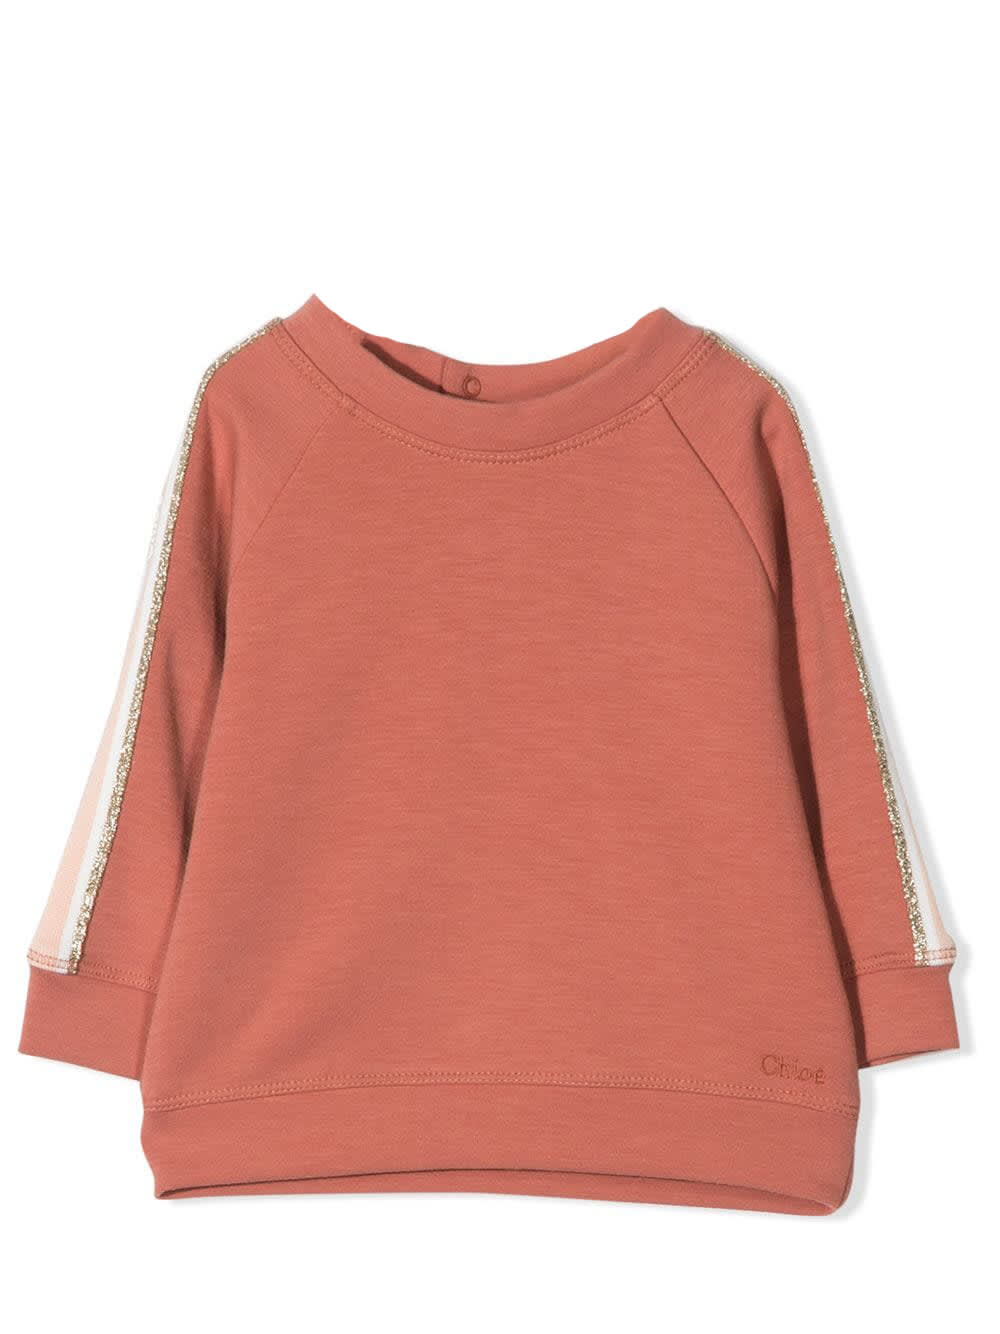 CHLOÉ SWEATSHIRT WITH EMBROIDERY,C05375 366